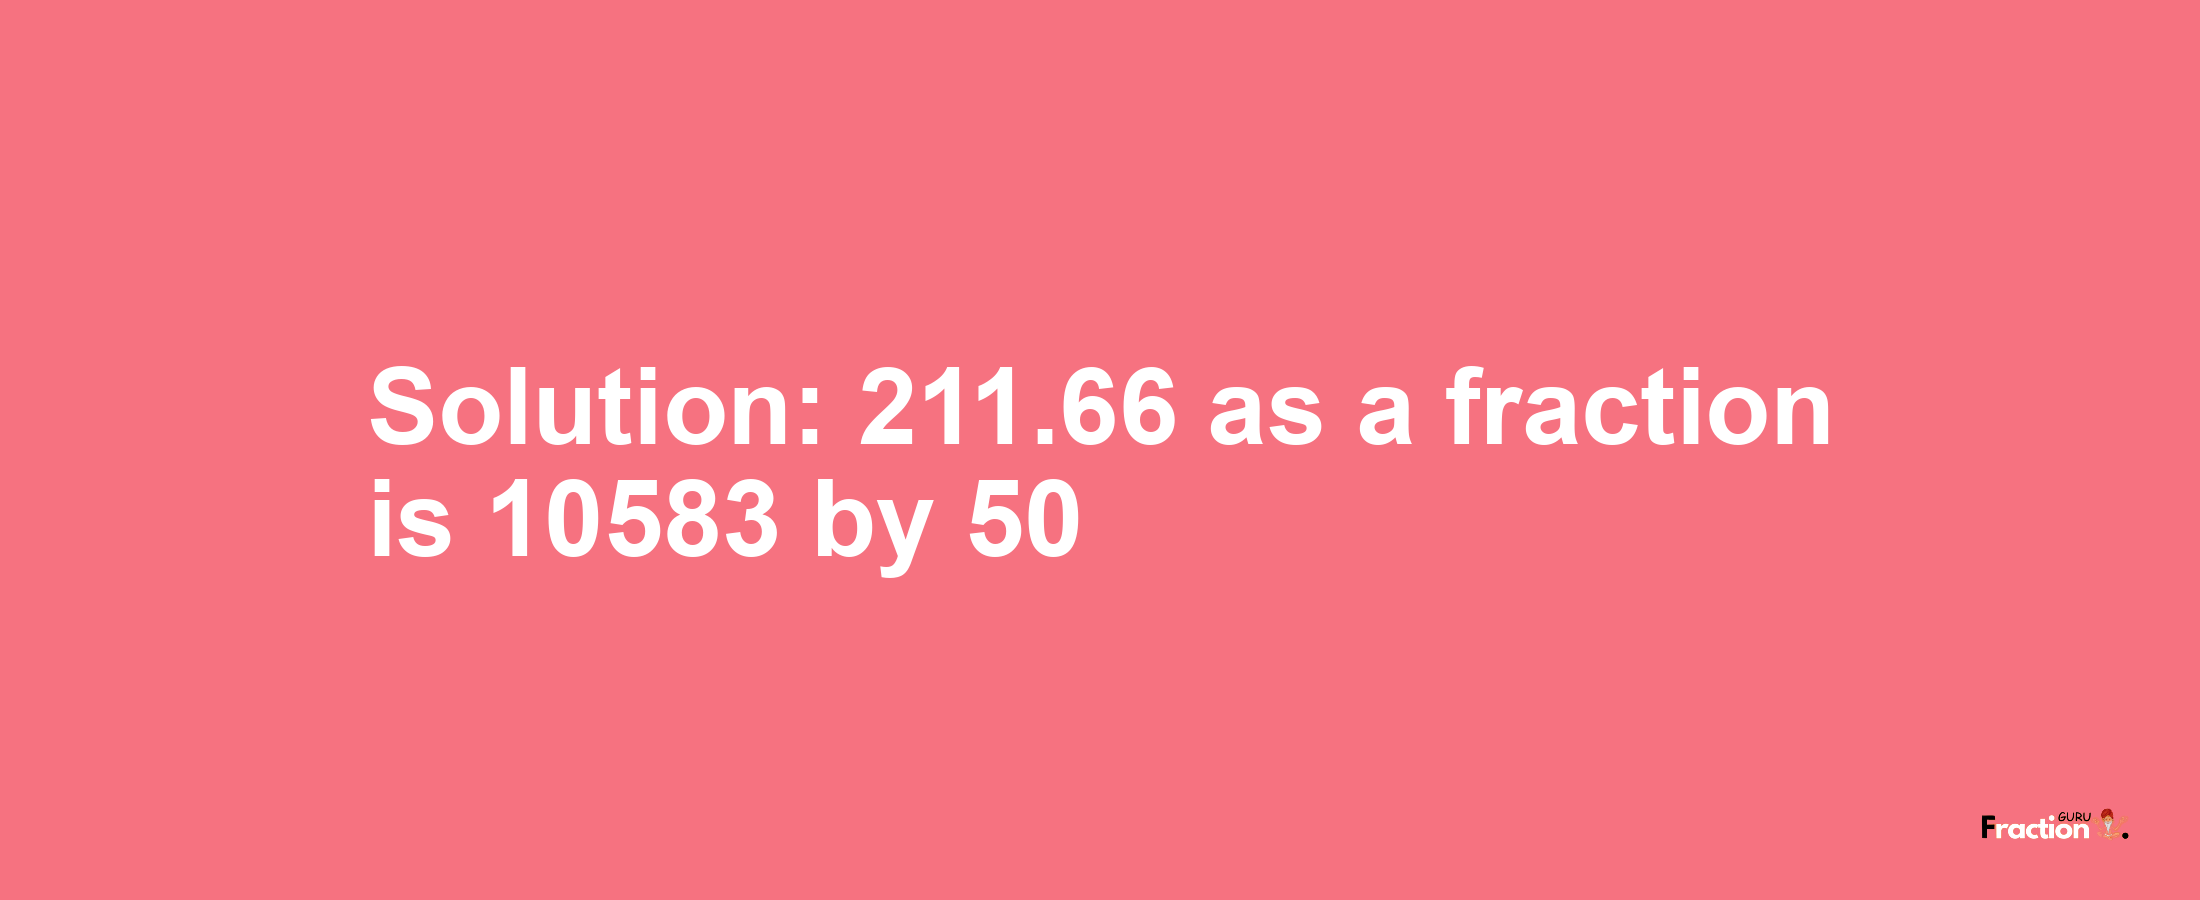 Solution:211.66 as a fraction is 10583/50